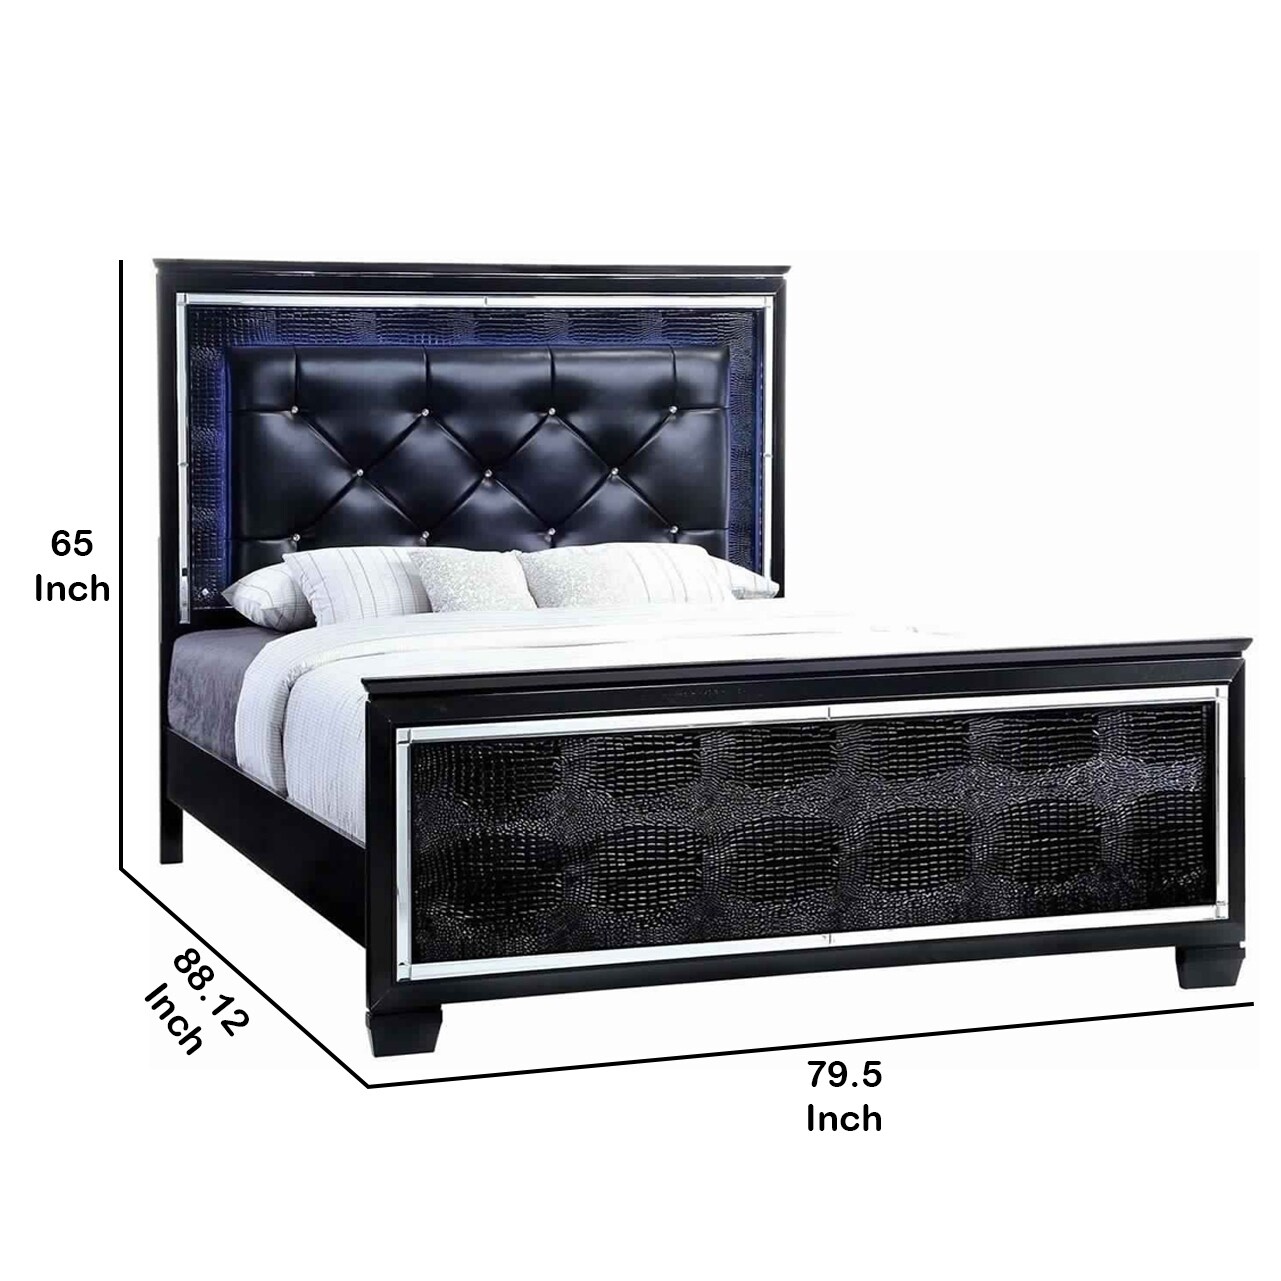 Textured Eastern King Size Bed with Silver Trim Accents, Black